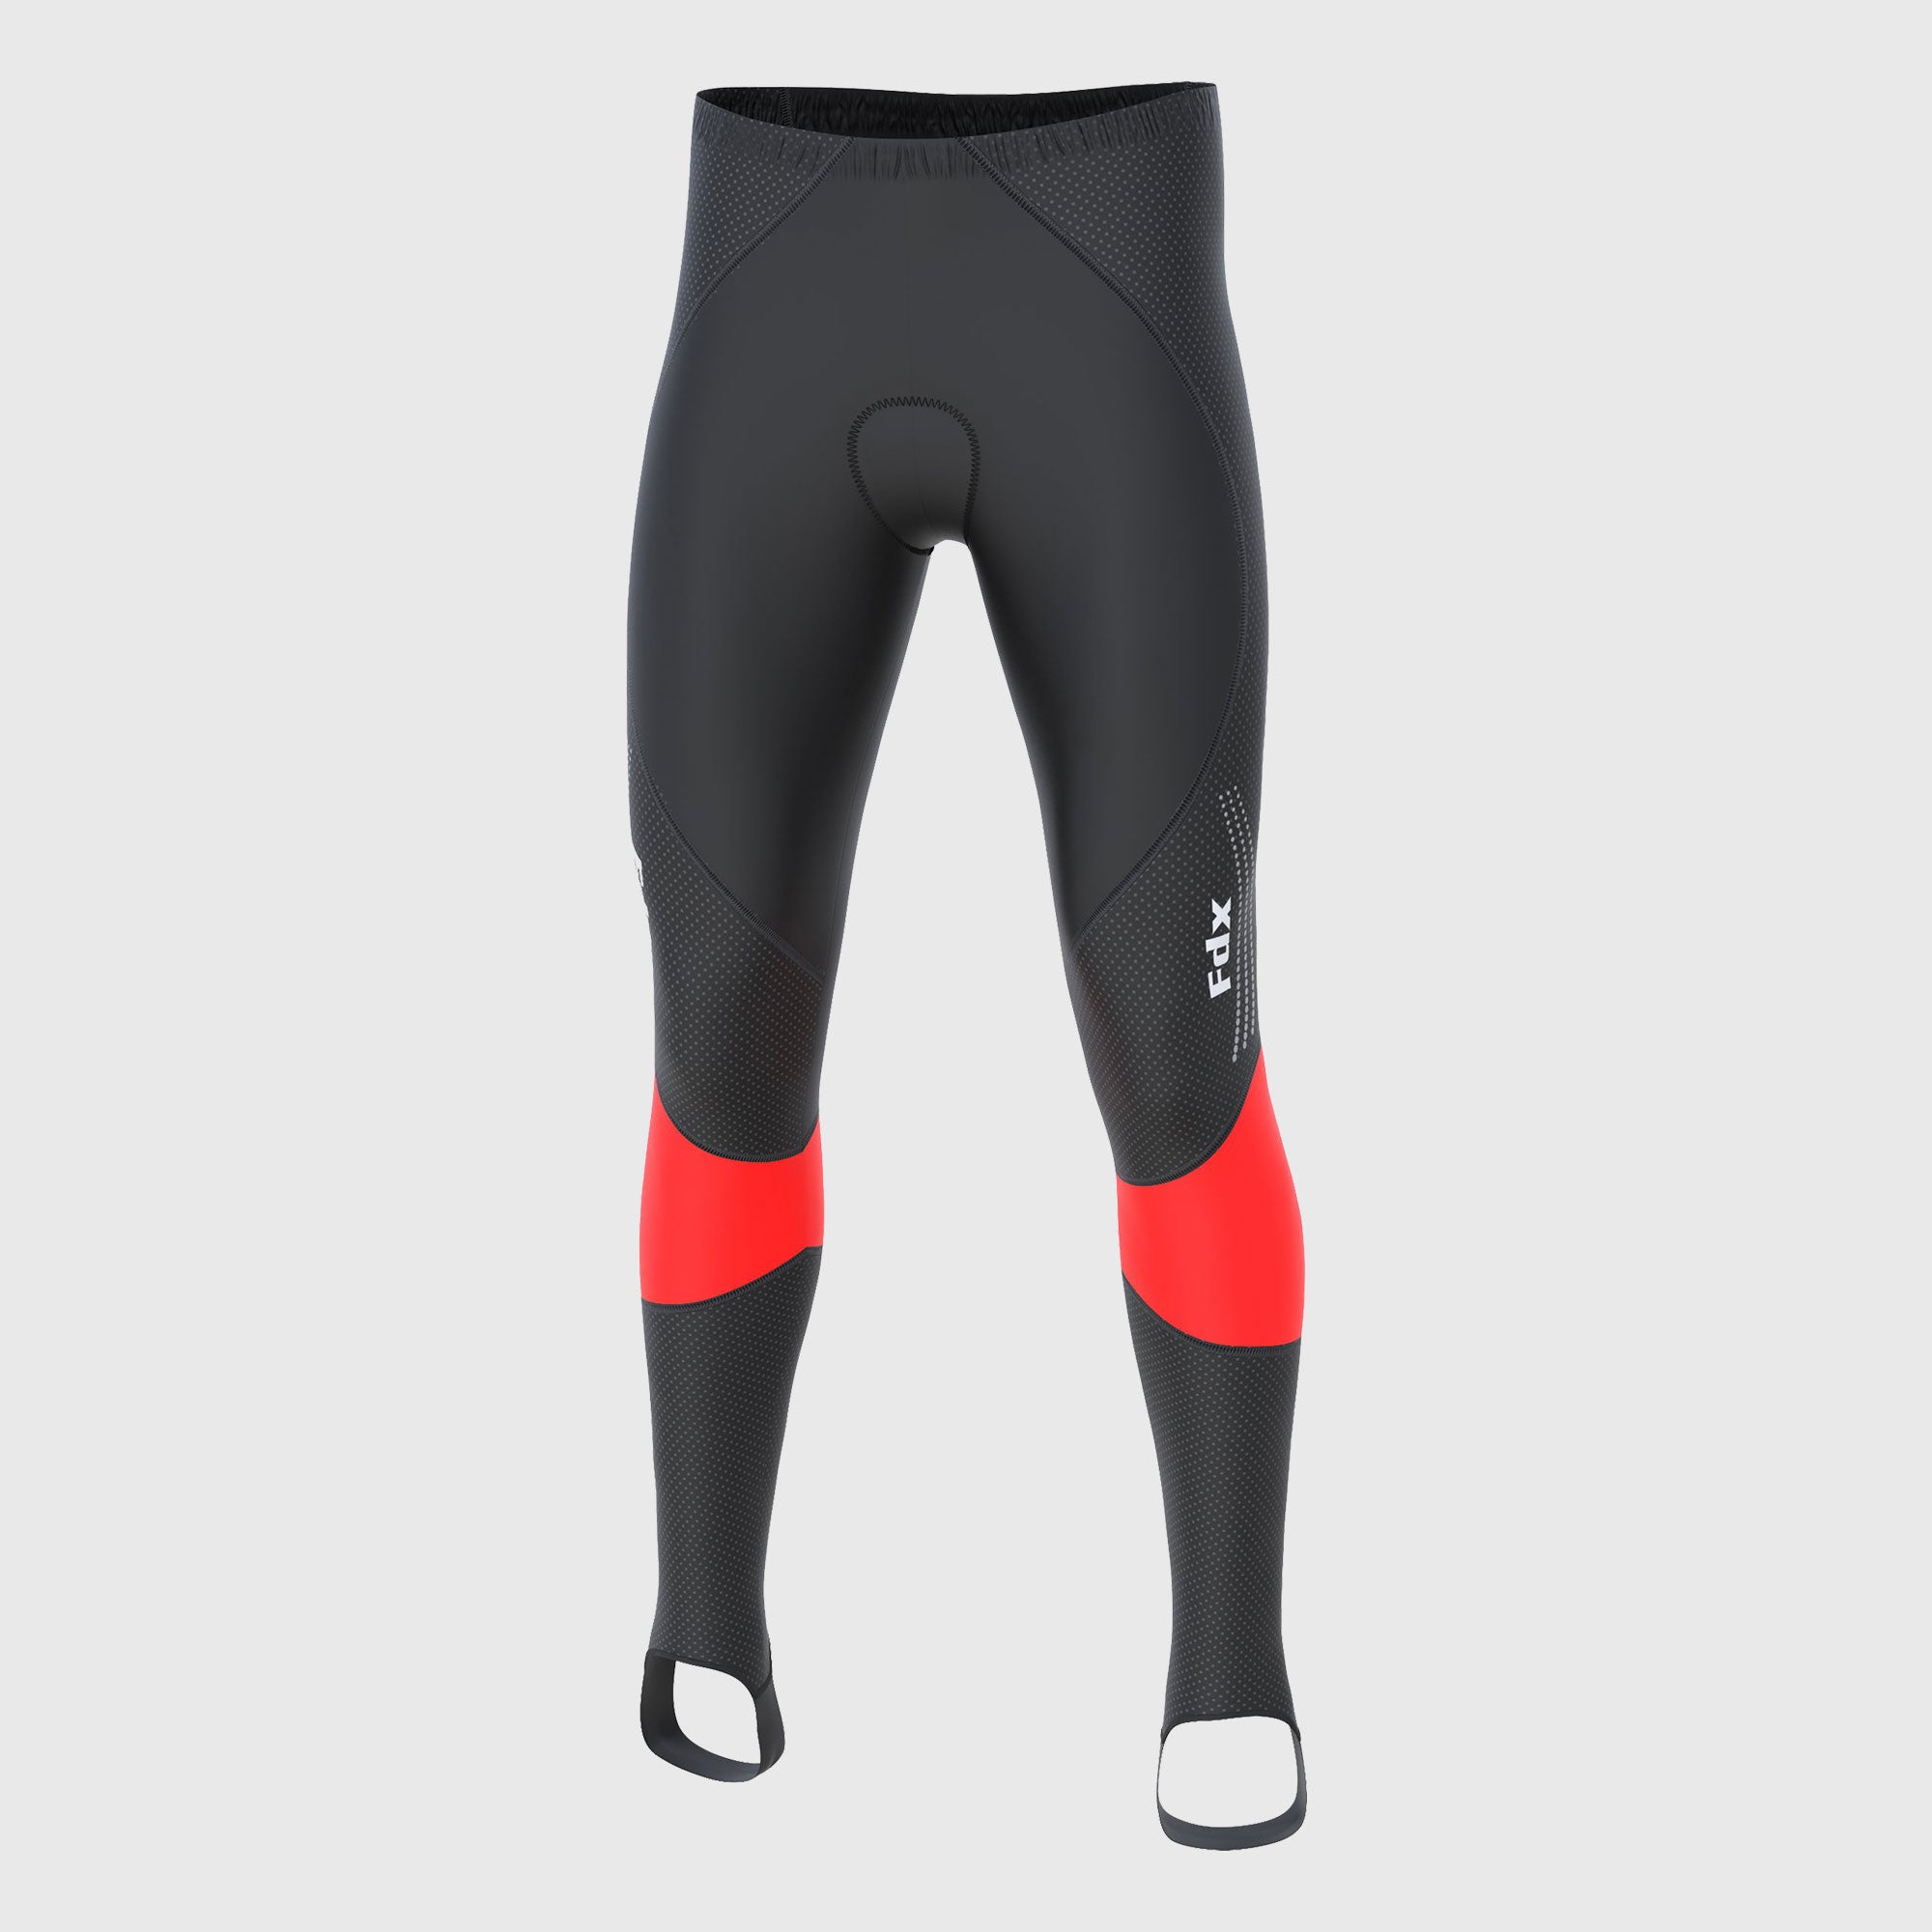 Fdx Heatchaser Men's Compression All Season Cycling Tights Black, Red &  Blue